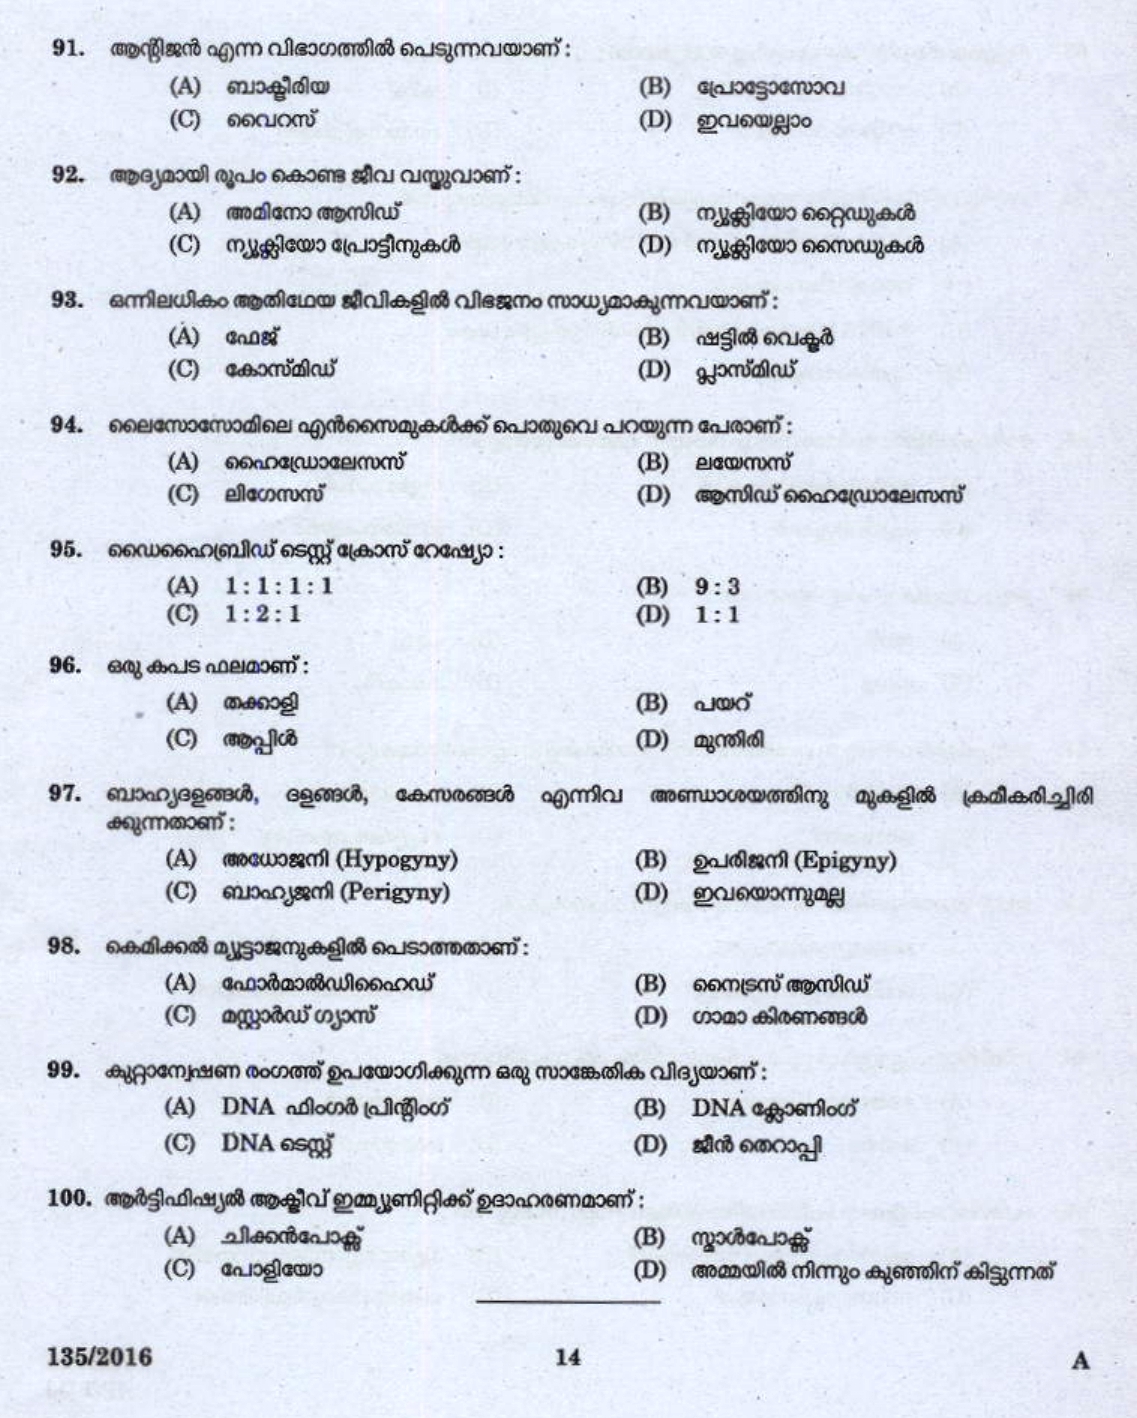 High School Assistant Natural Science (135/2016) Question Paper with Answer Key - Kerala PSC